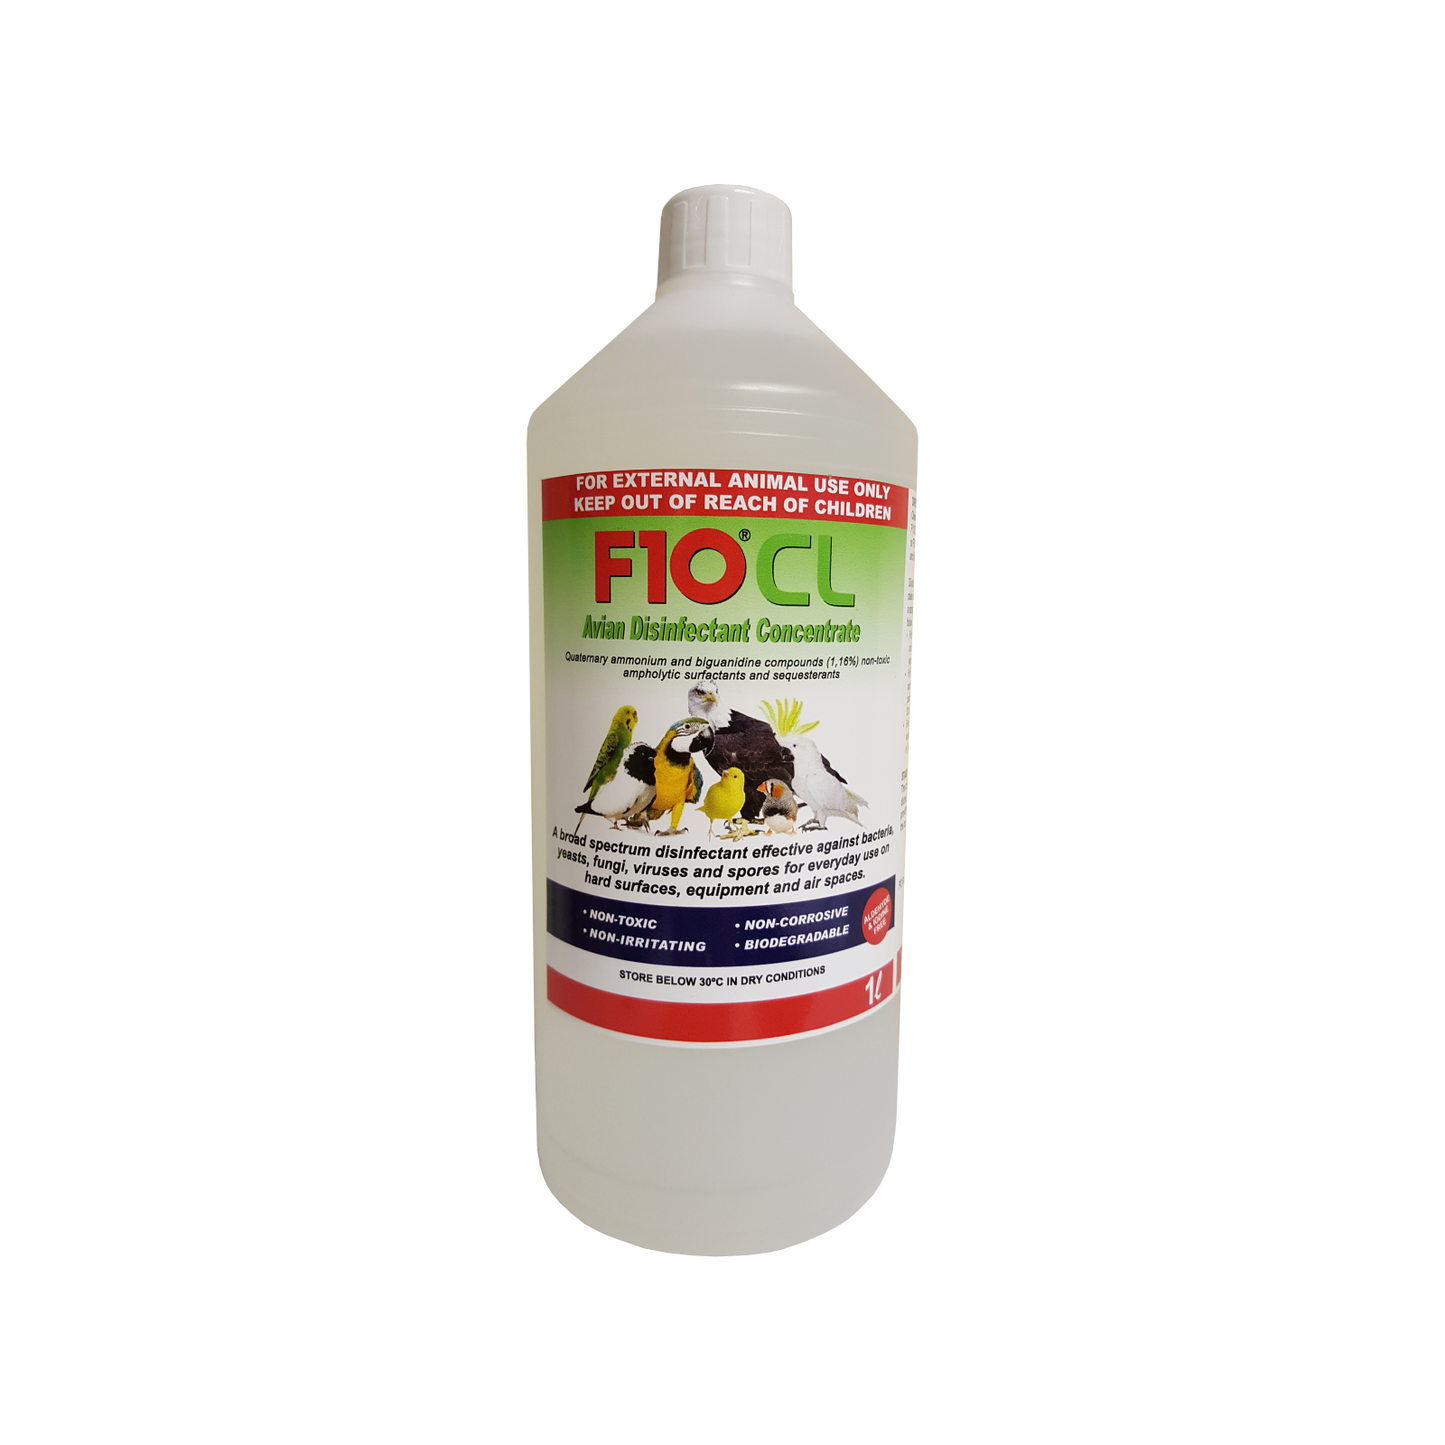 A 1 litre bottle of F10CL Avian Disinfectant Concentrate